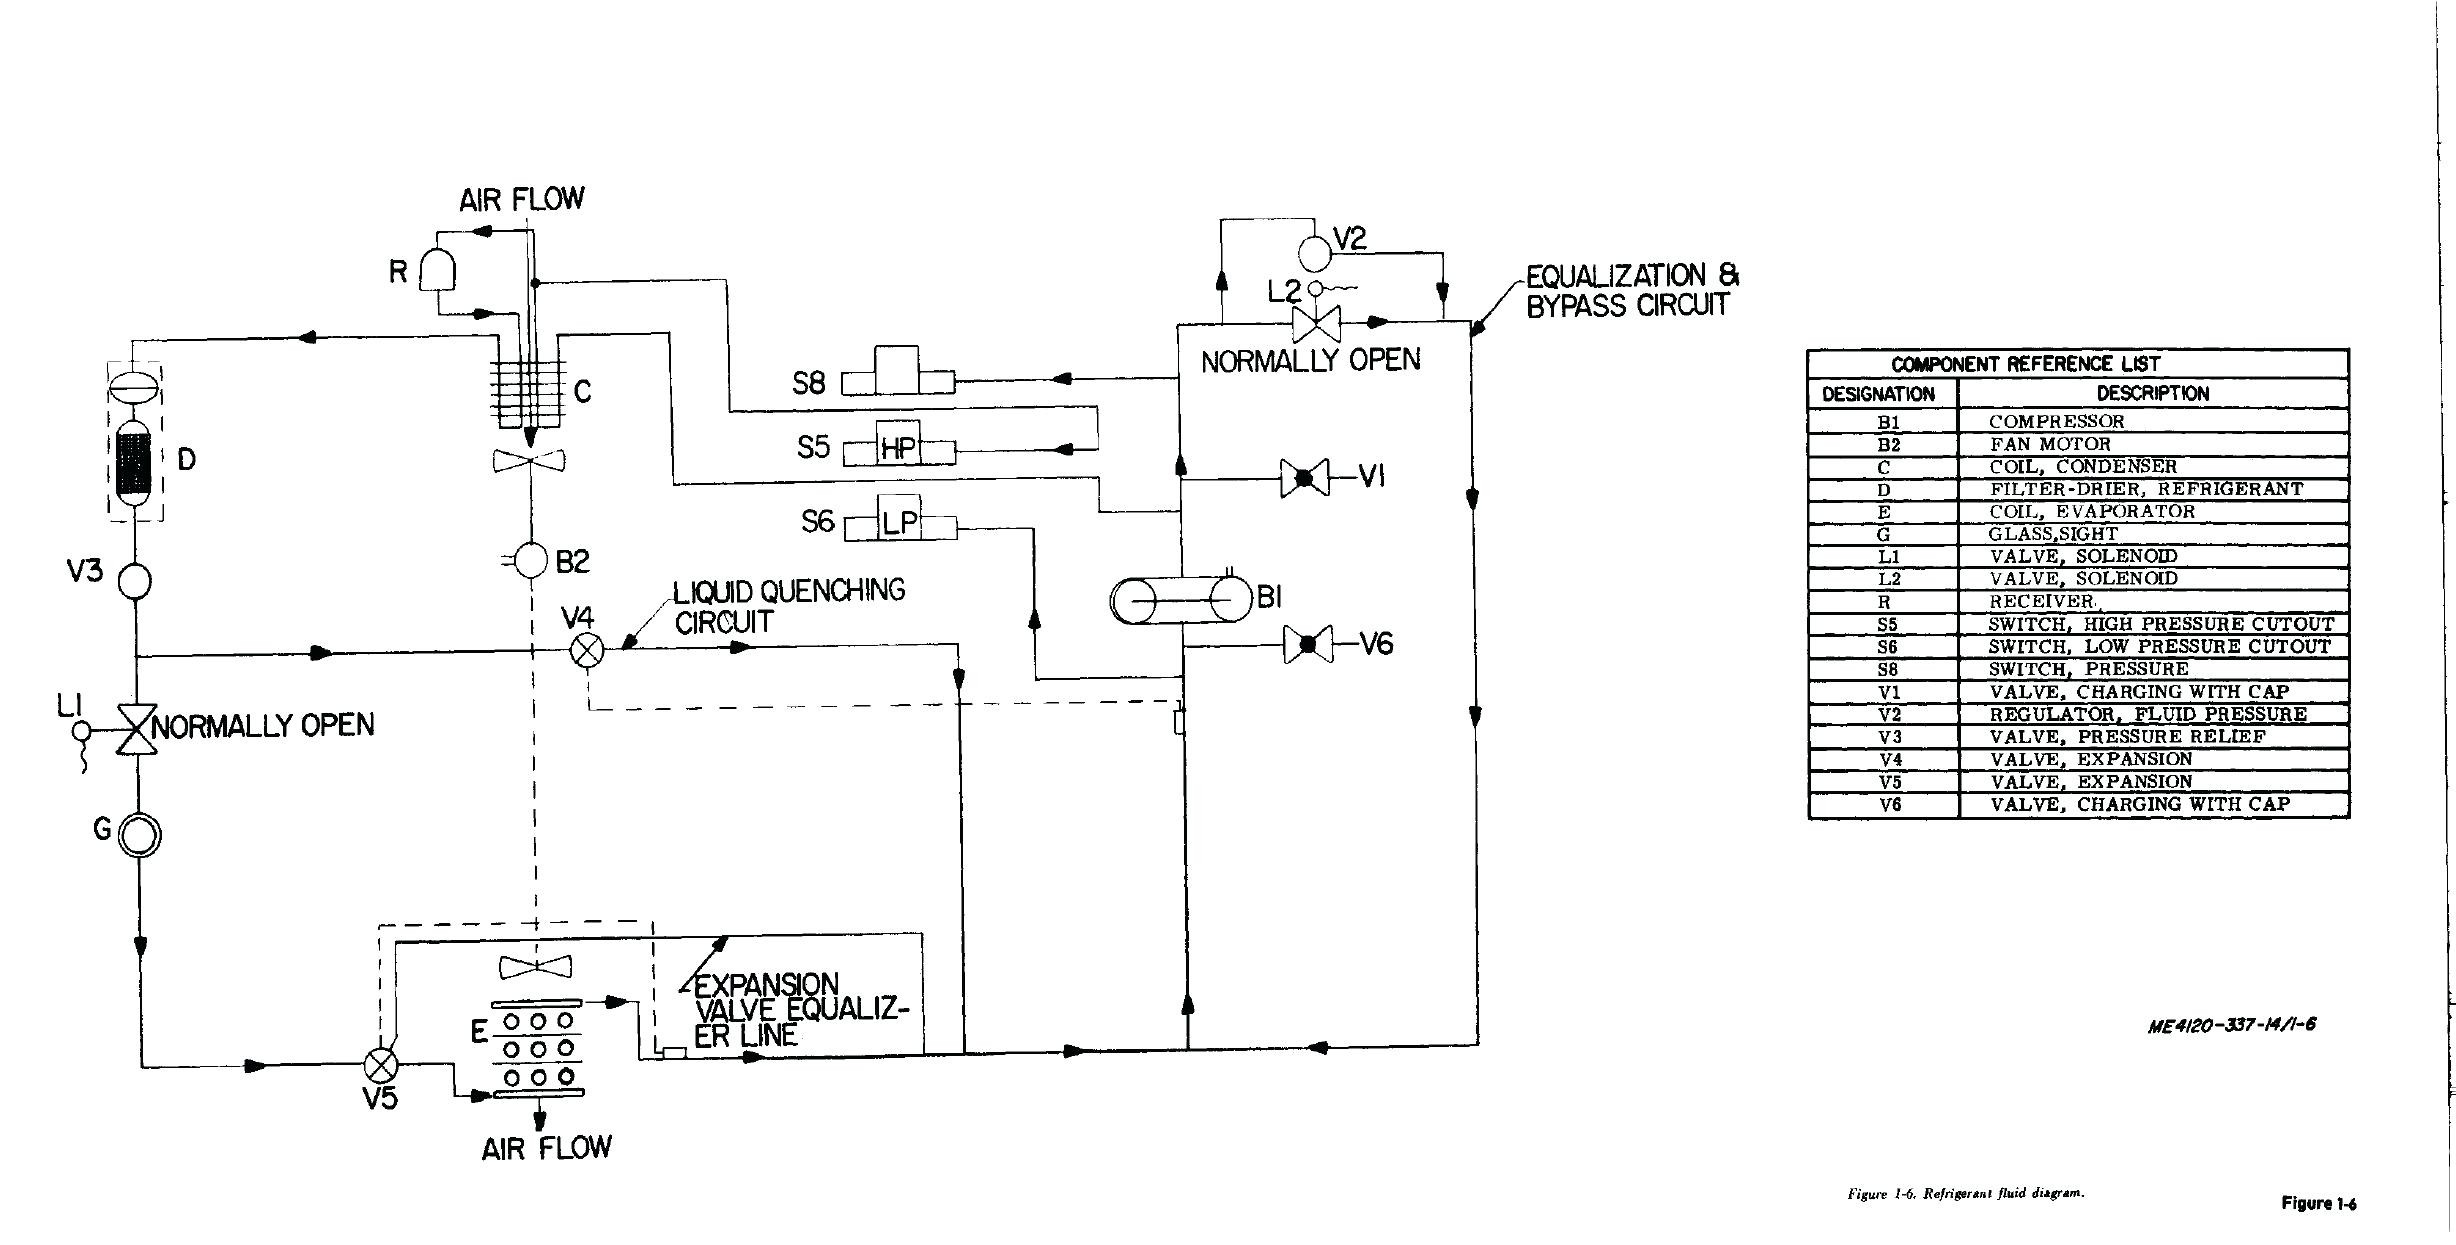 Full Size of Auto Air Conditioning Wiring Diagram Pdf Electrical Diagrams For Systems Part Two Conditioner